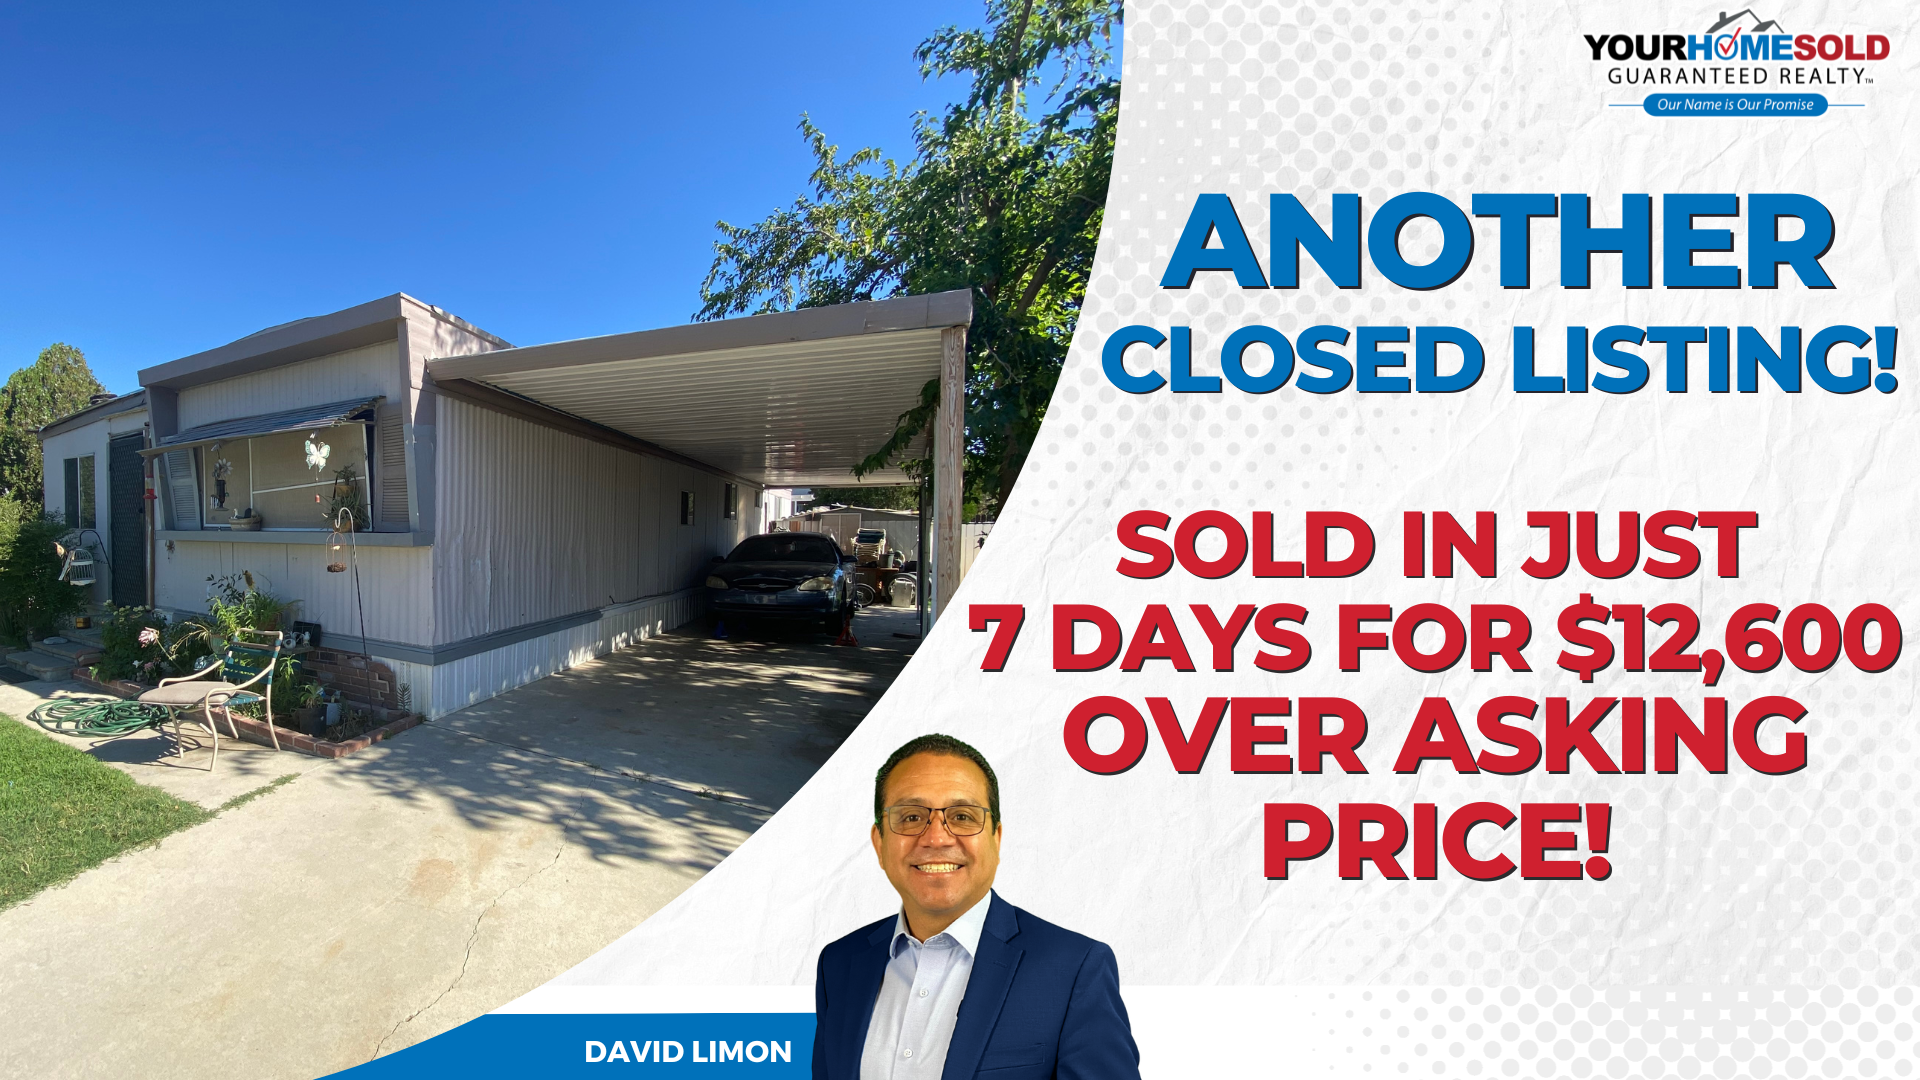 Your Home Sold Guaranteed Realty - David Limon Team